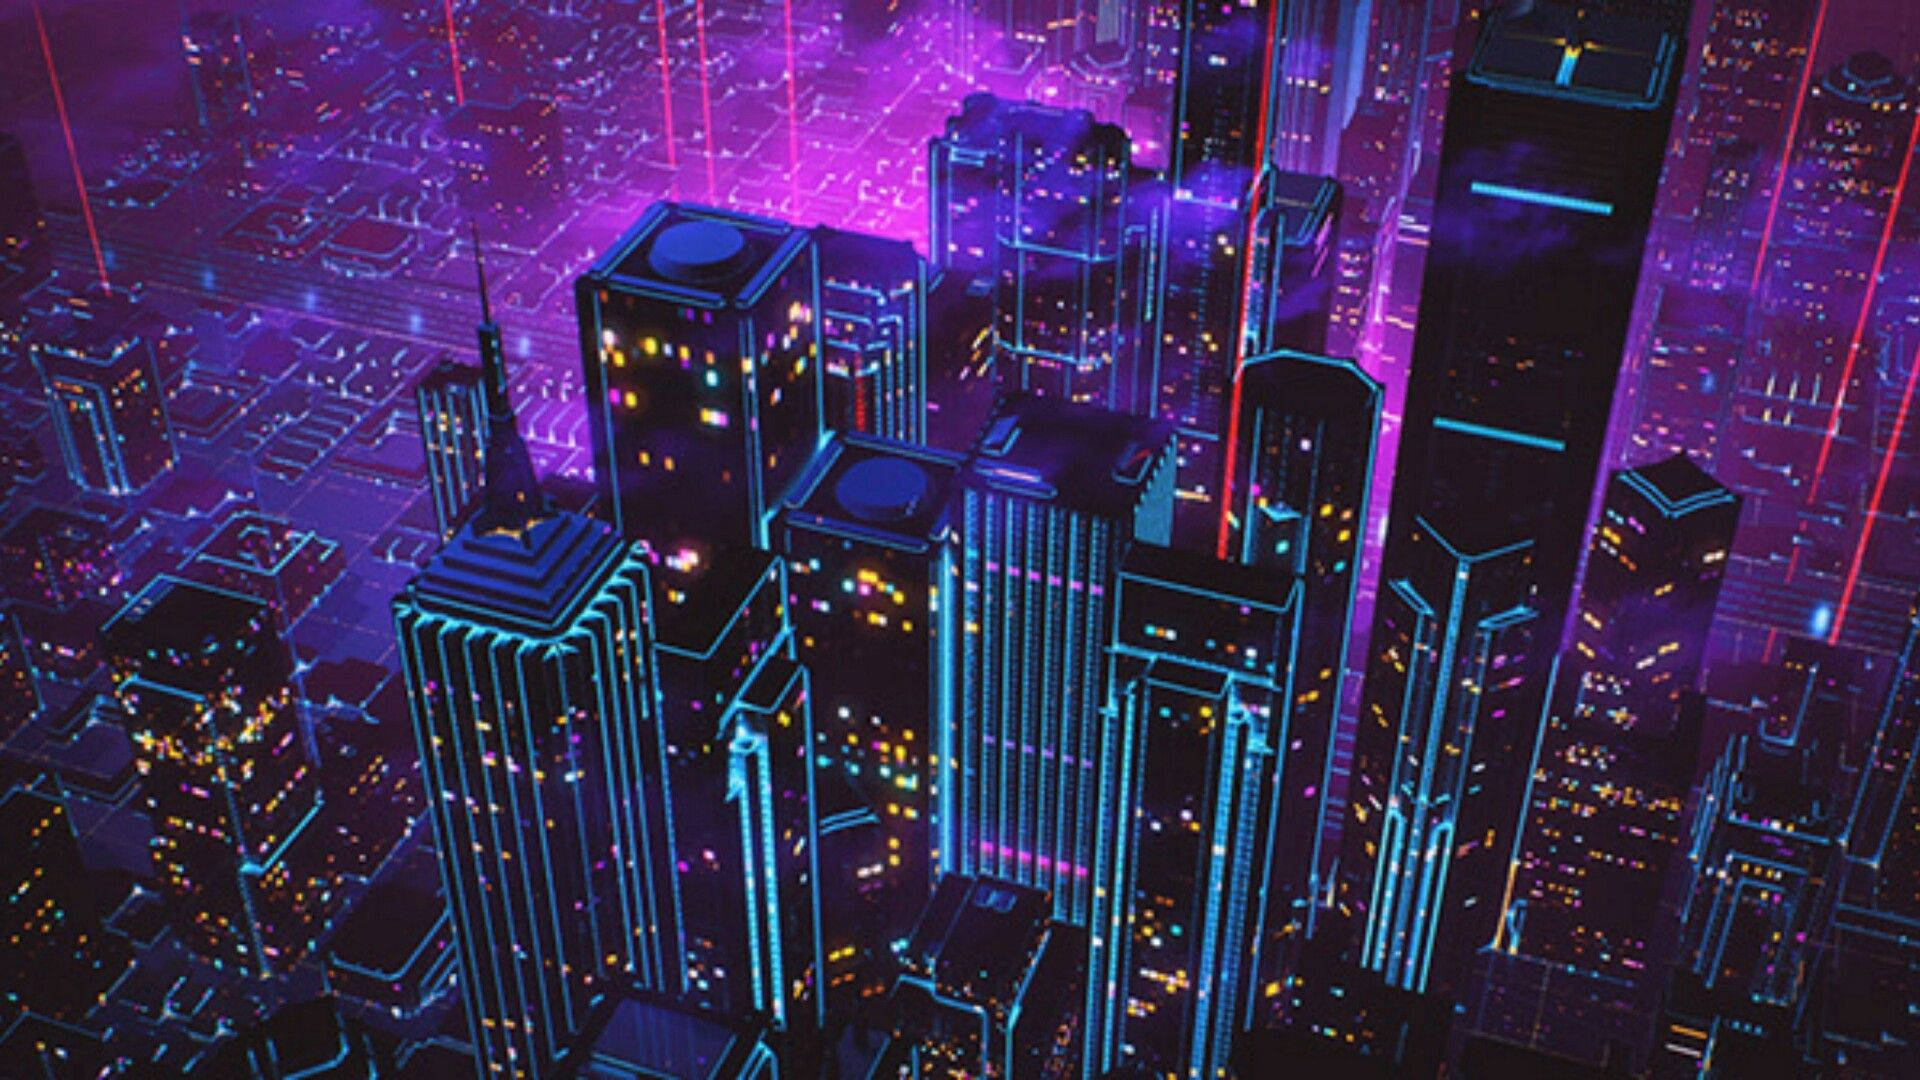 Top 999+ Neon City Wallpaper Full HD, 4K✅Free to Use